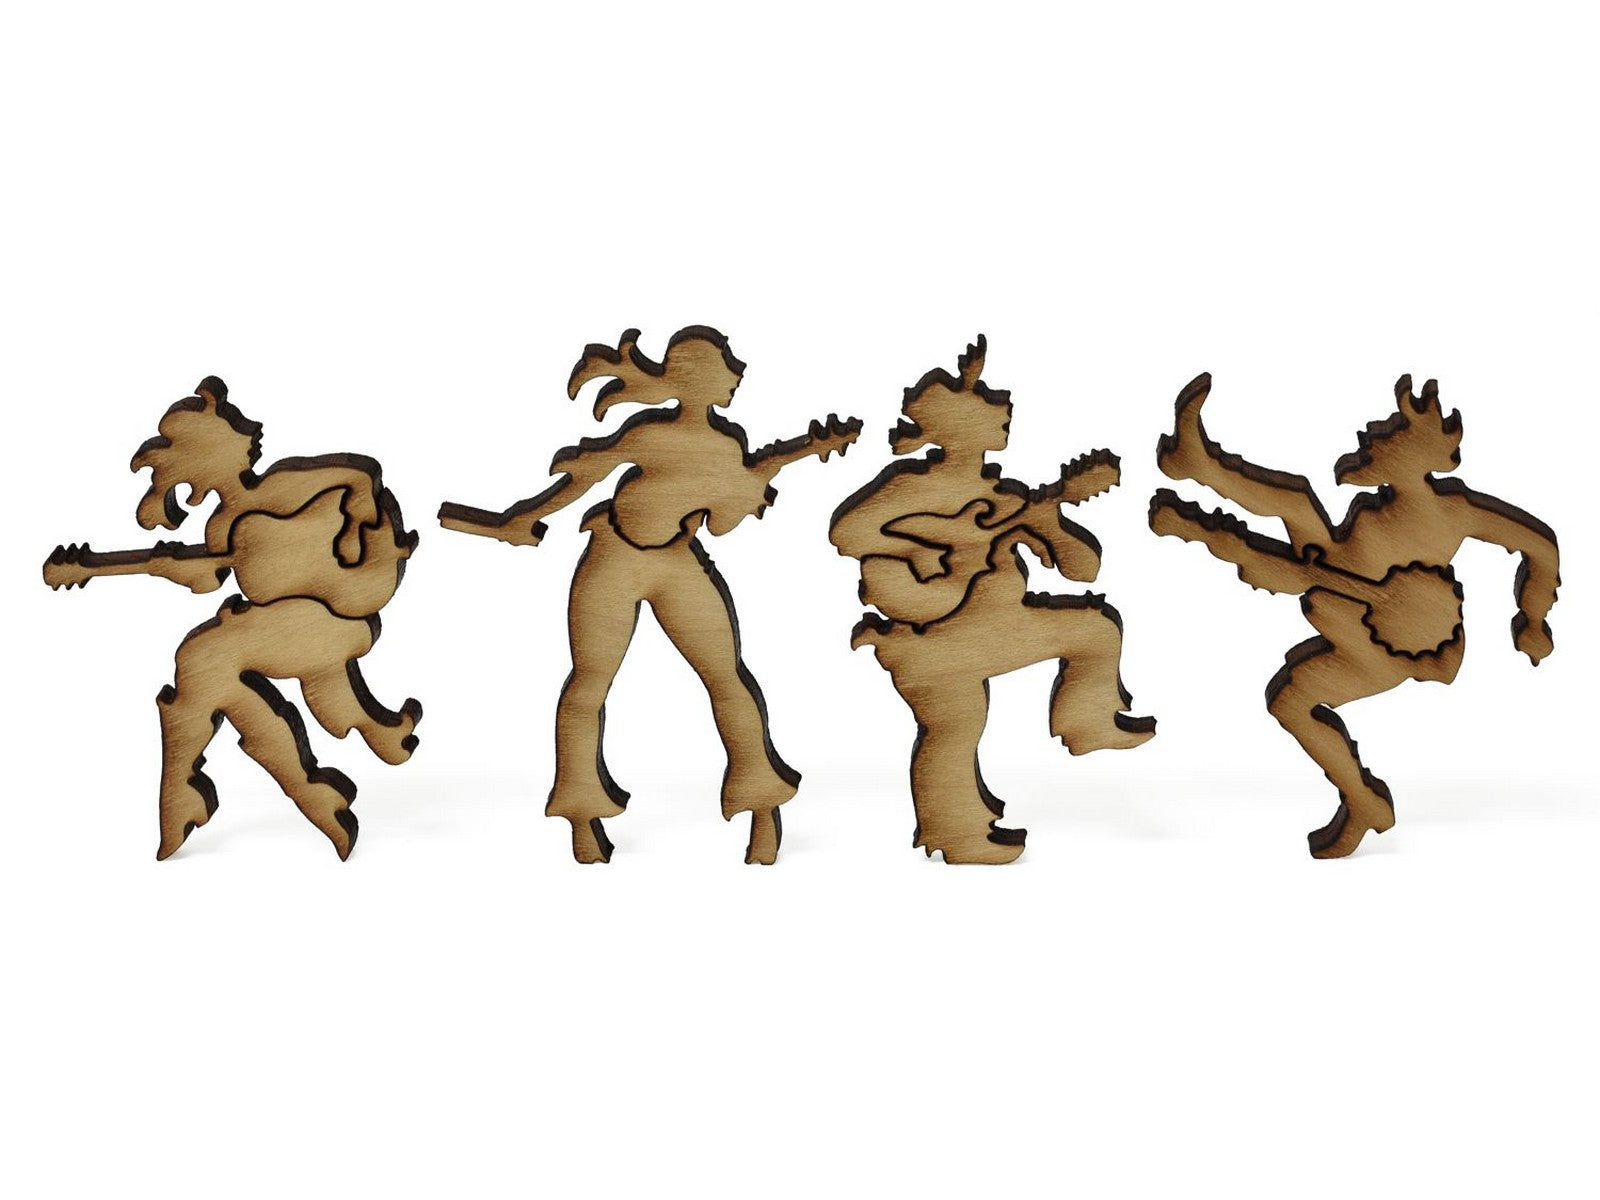 A closeup of pieces showing musicians playing instruments.